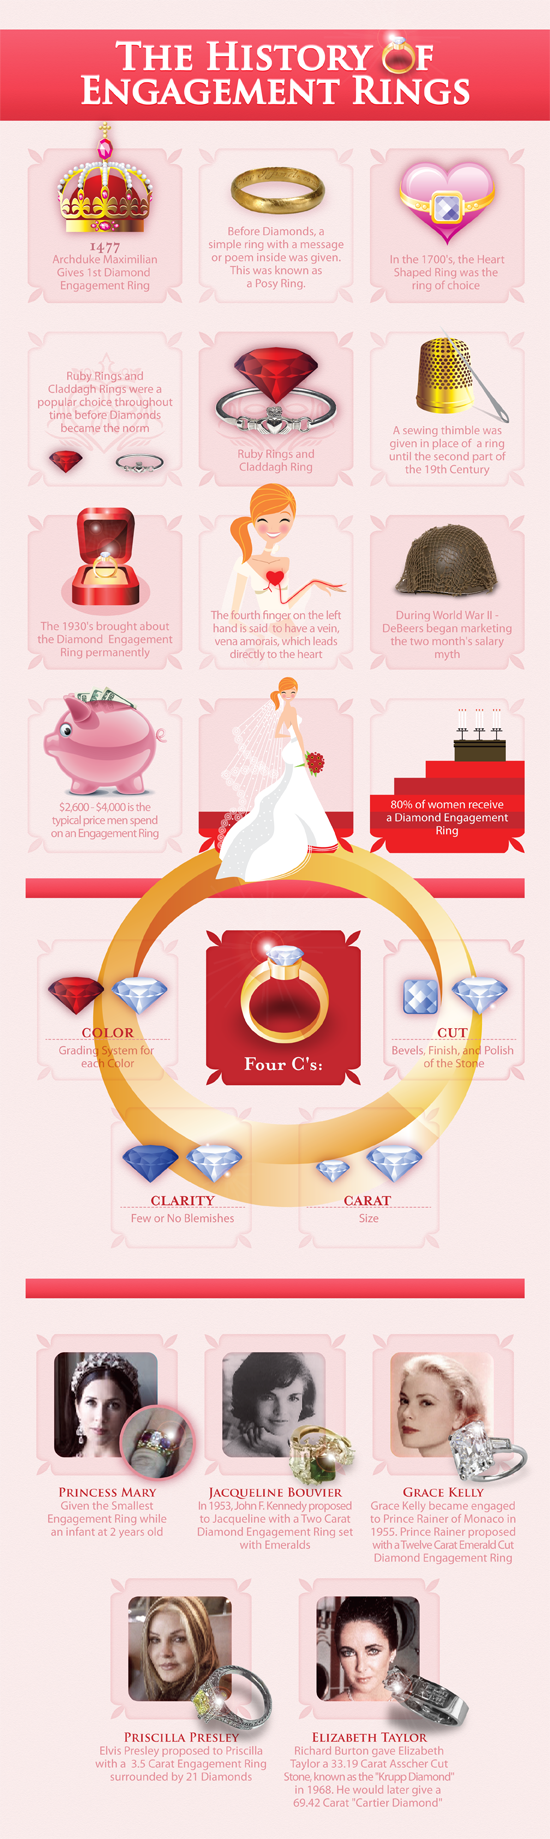 The History of Engagement Rings 2